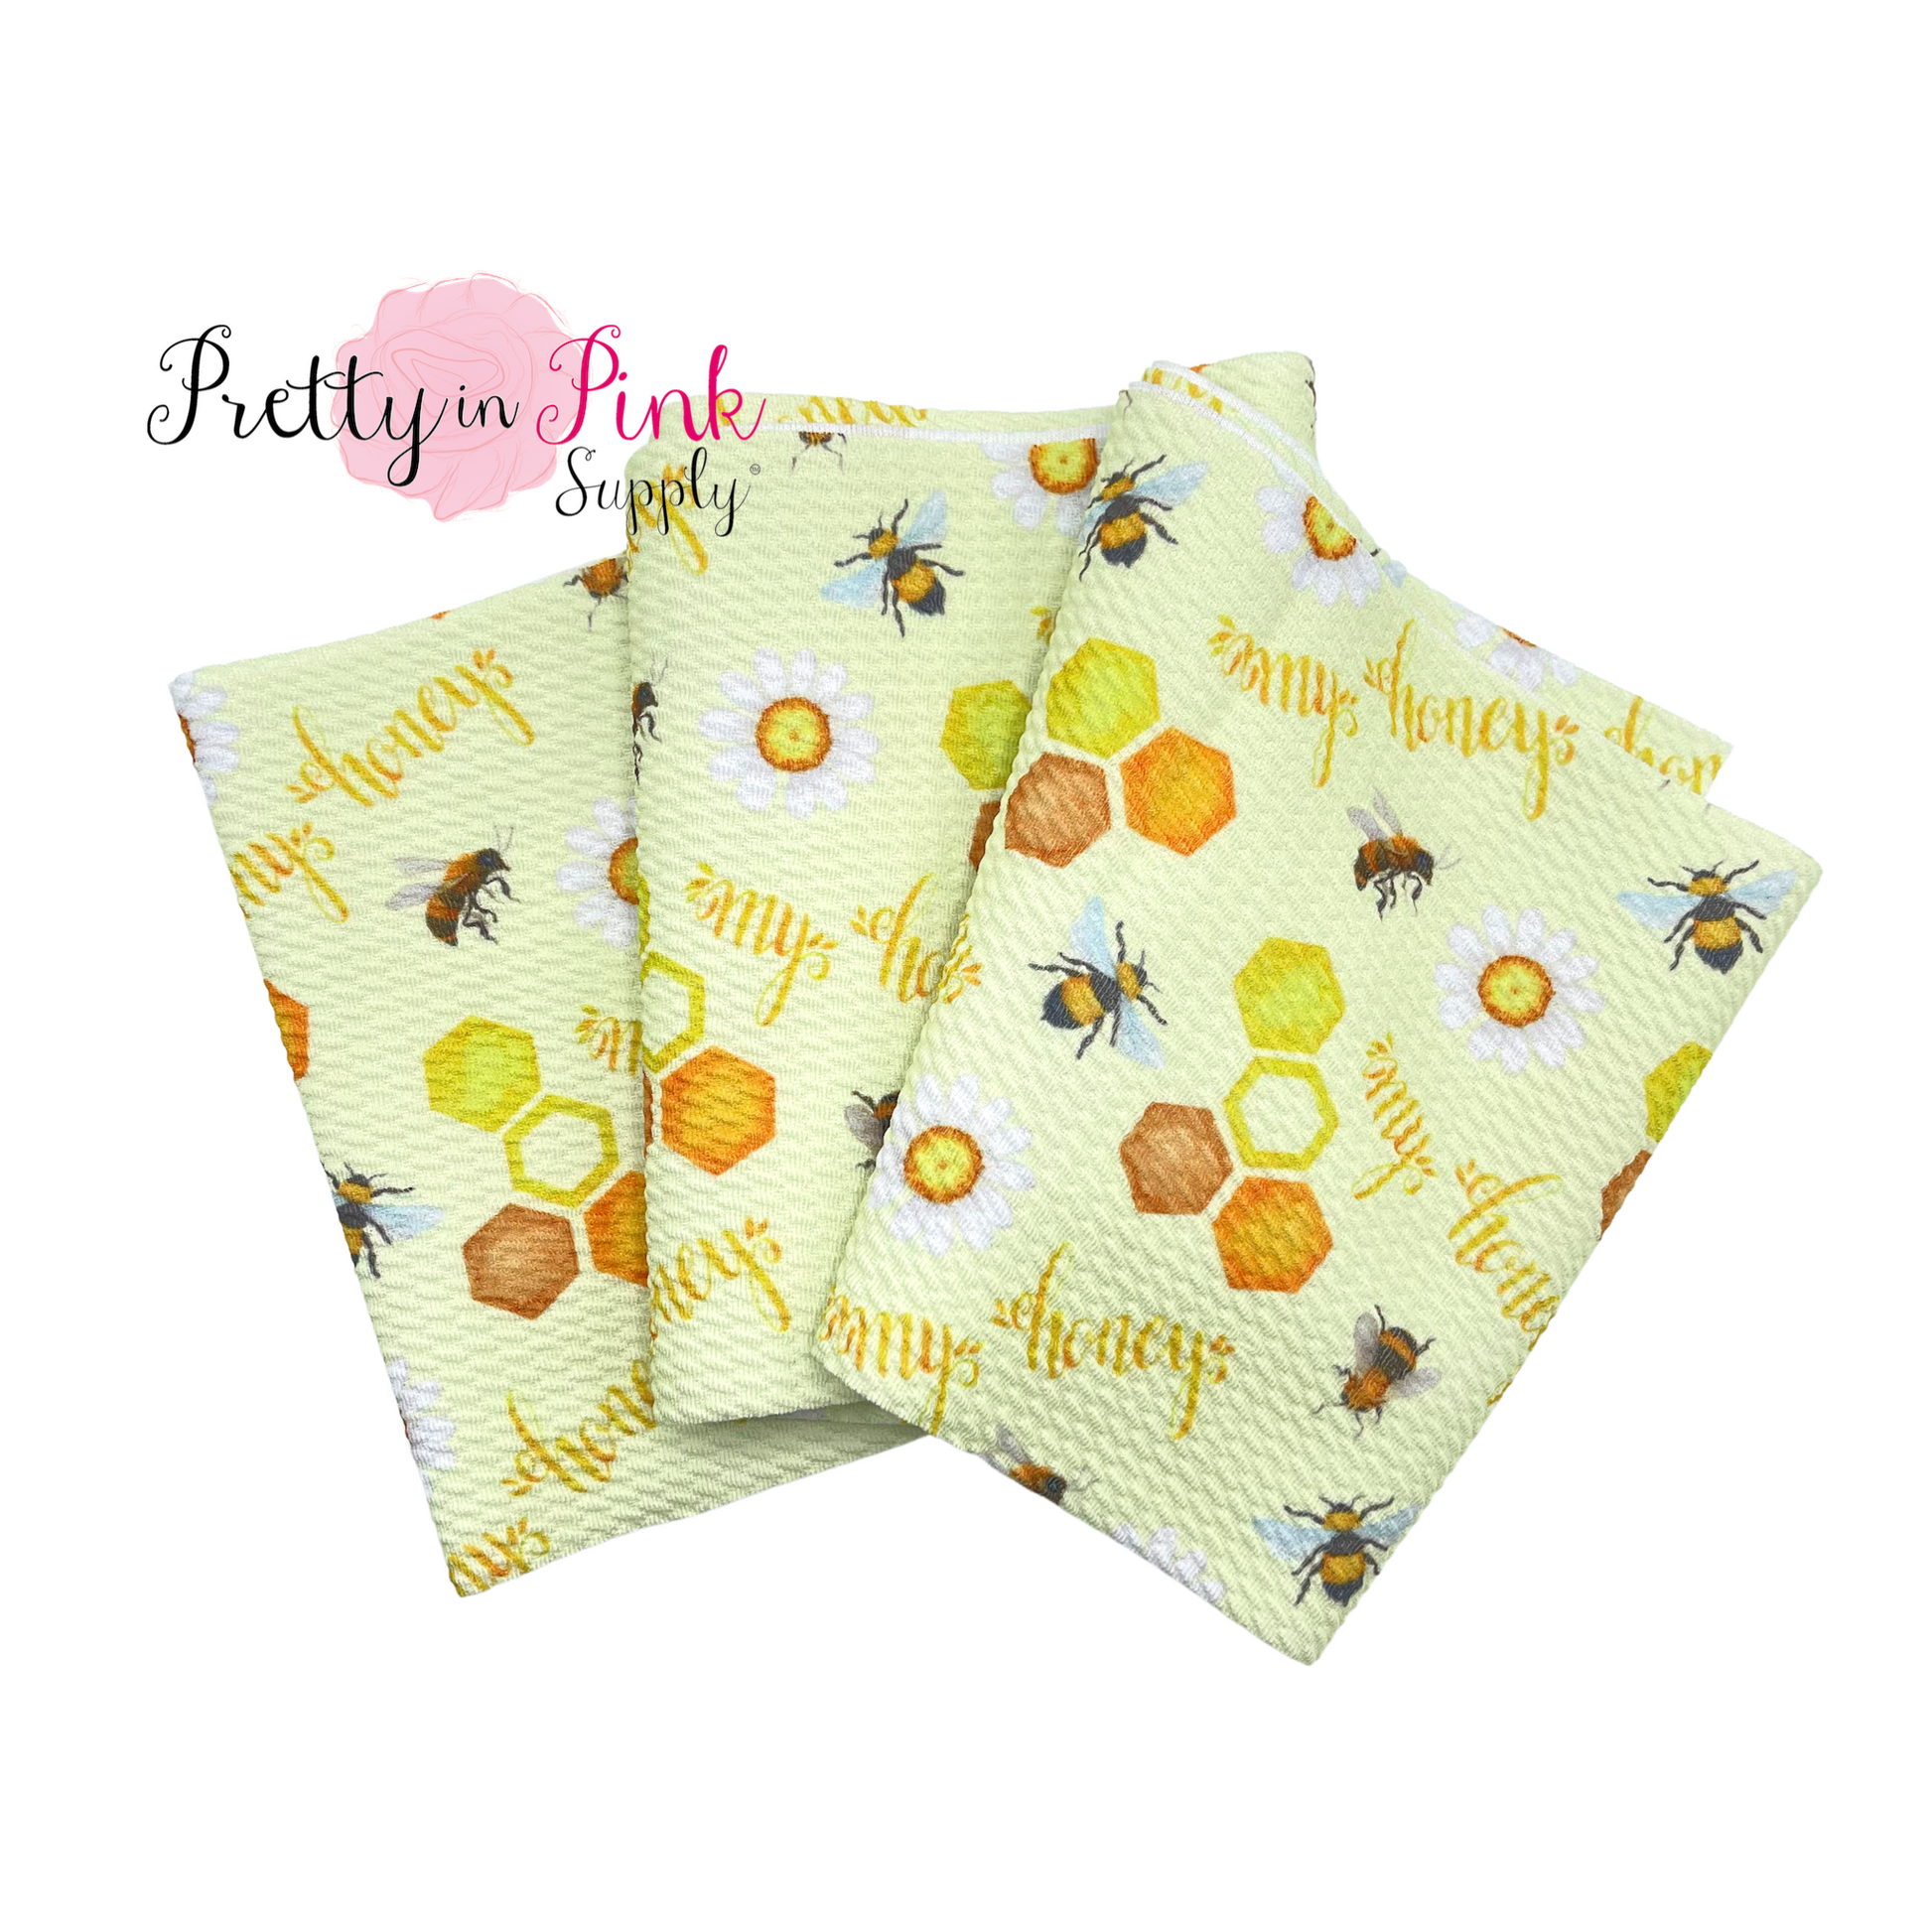 My Honey | Liverpool Fabric - Pretty in Pink Supply